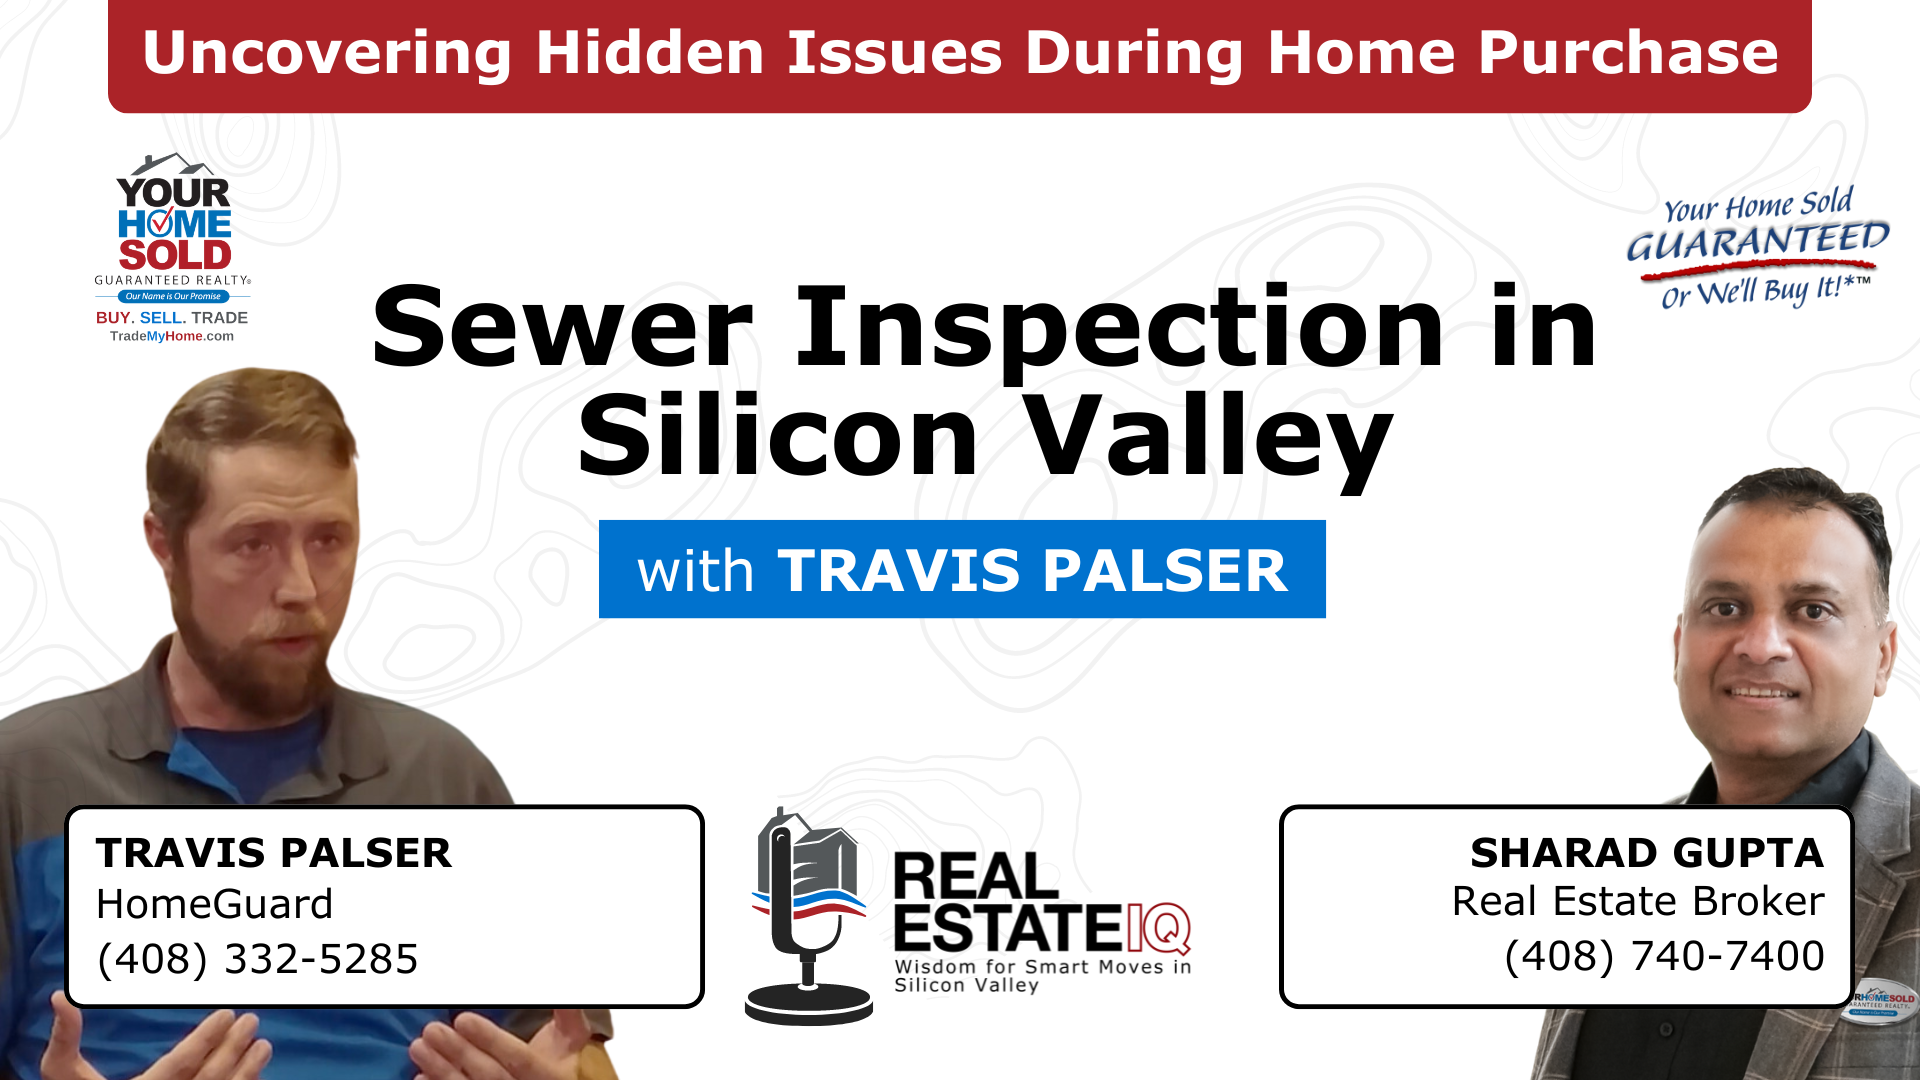 Sewer Inspections: Uncovering Hidden Issues During Home Purchase in Silicon Valley Video